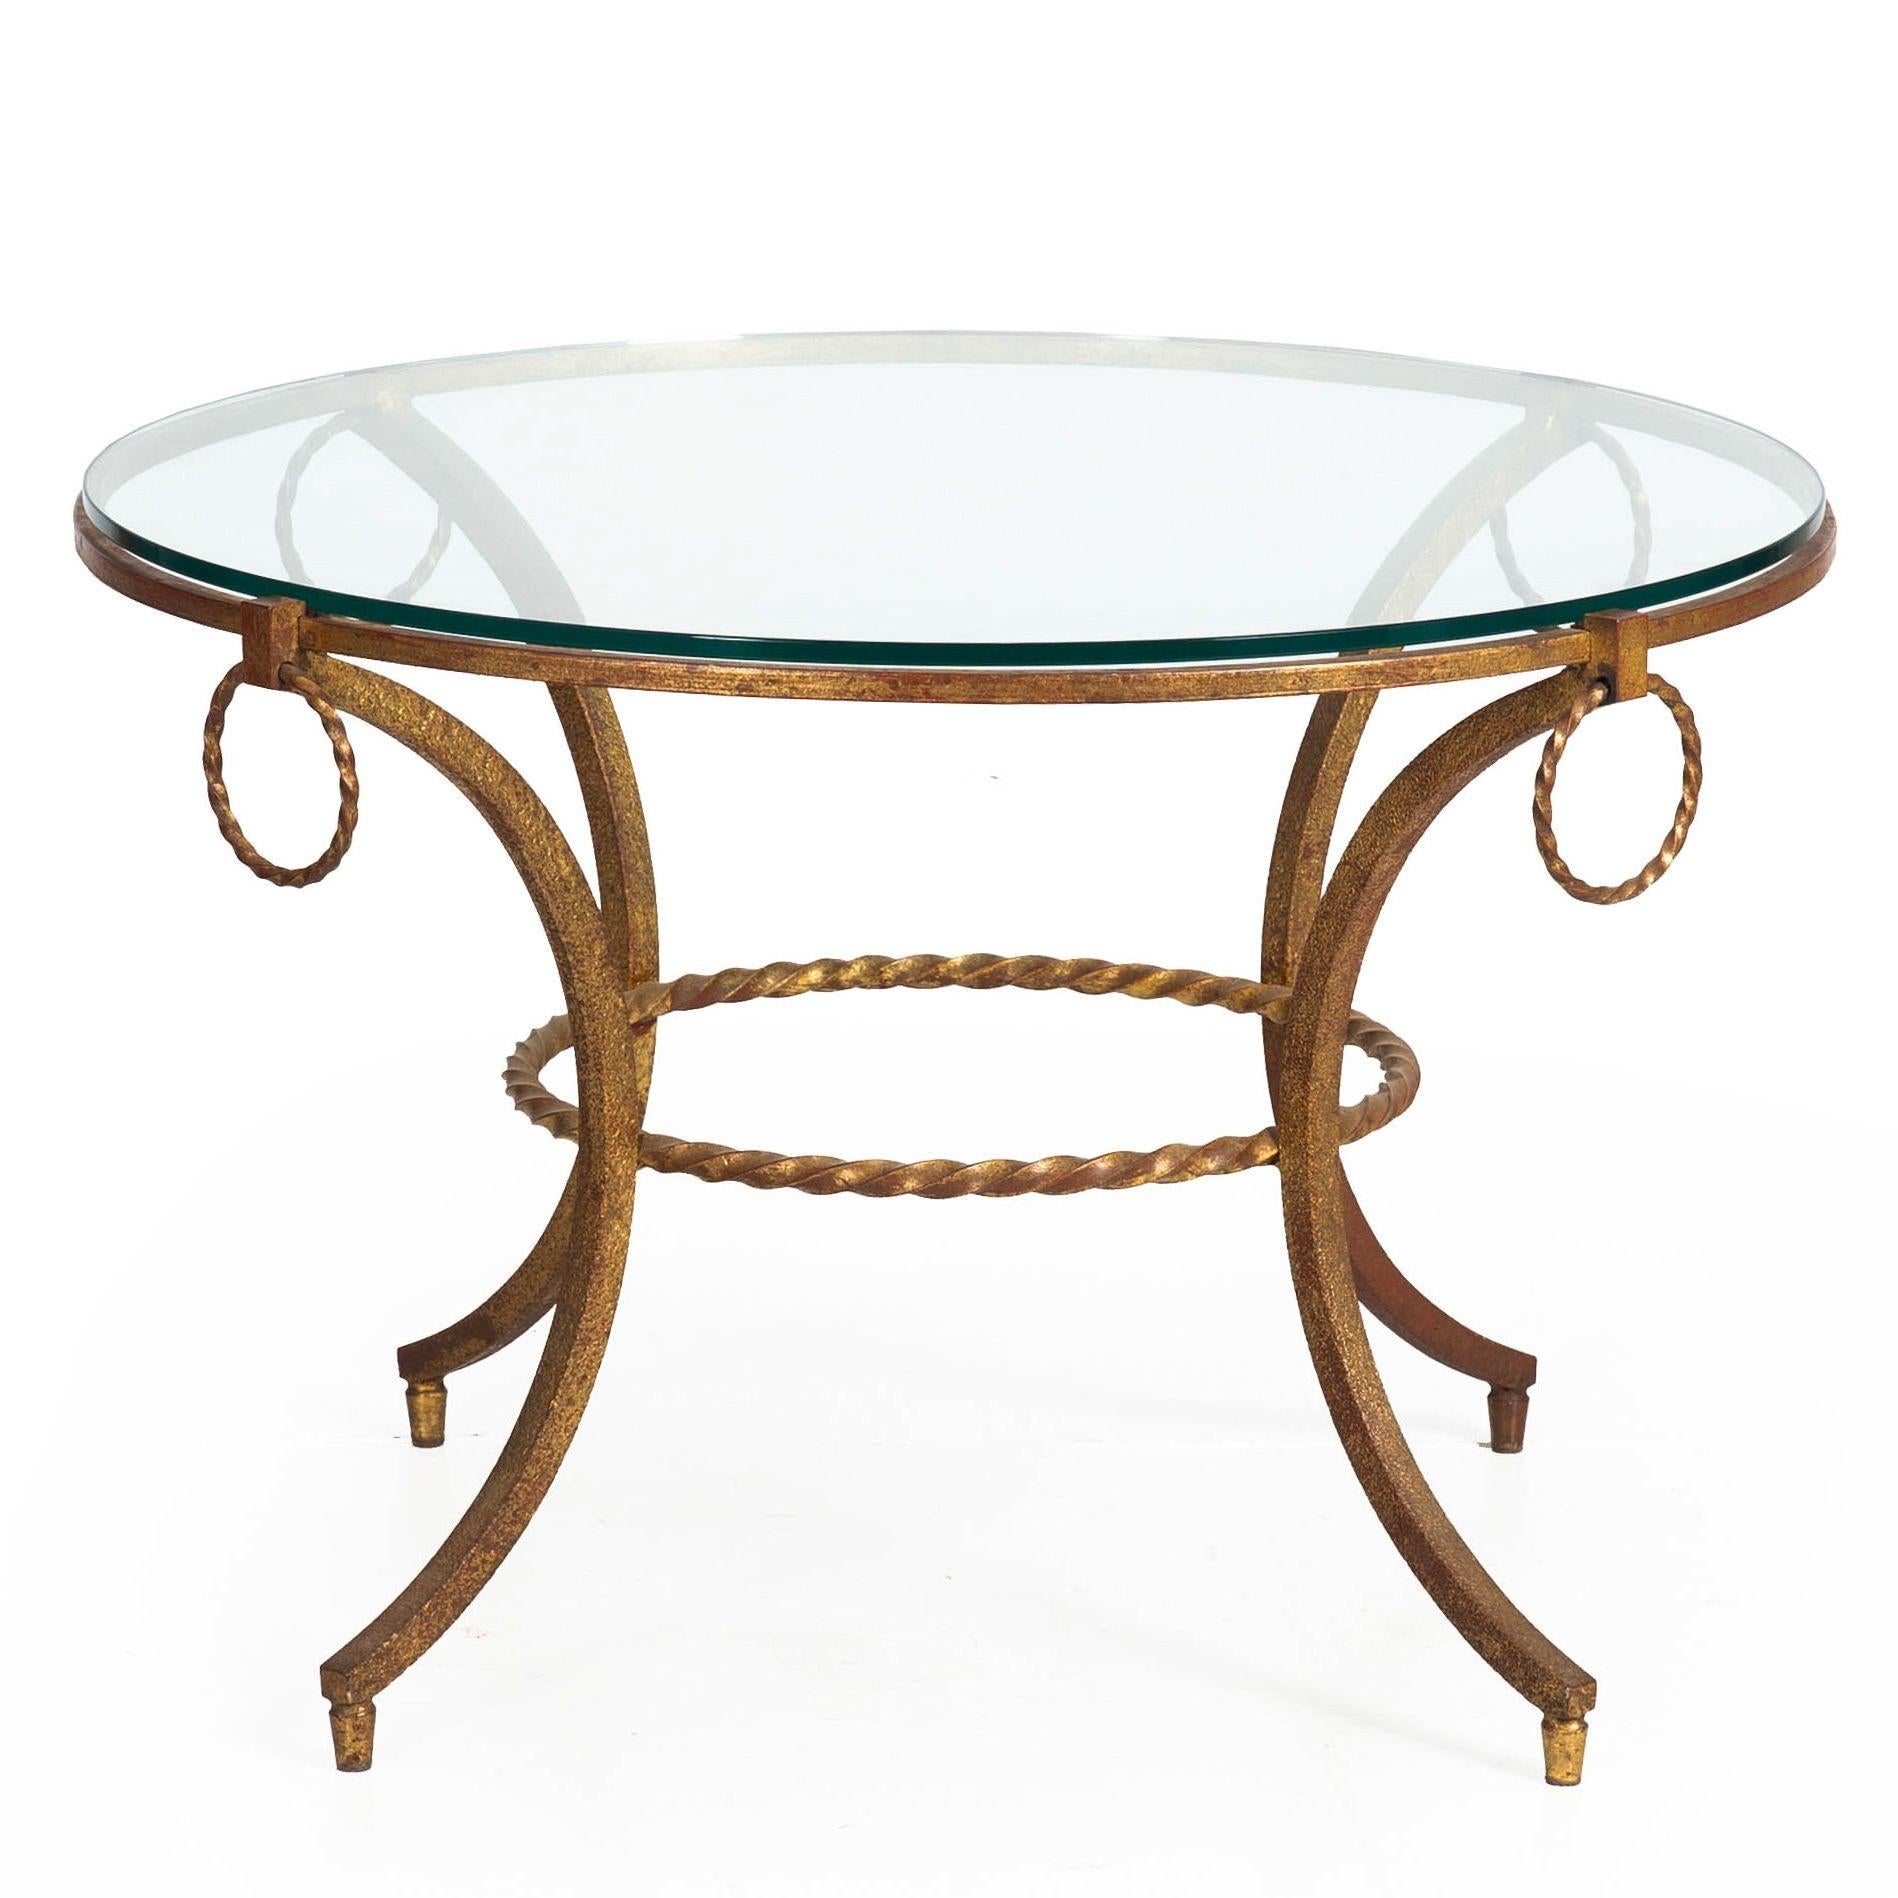 MODERNIST GILDED WROUGHT-IRON AND GLASS COFFEE TABLE
French, circa 1950s  unmarked
Item # 401RGG02P-1

An endlessly interesting modernist accent table from the 1950s, it works perfectly both as a side table beside a low sofa or chair or as a coffee